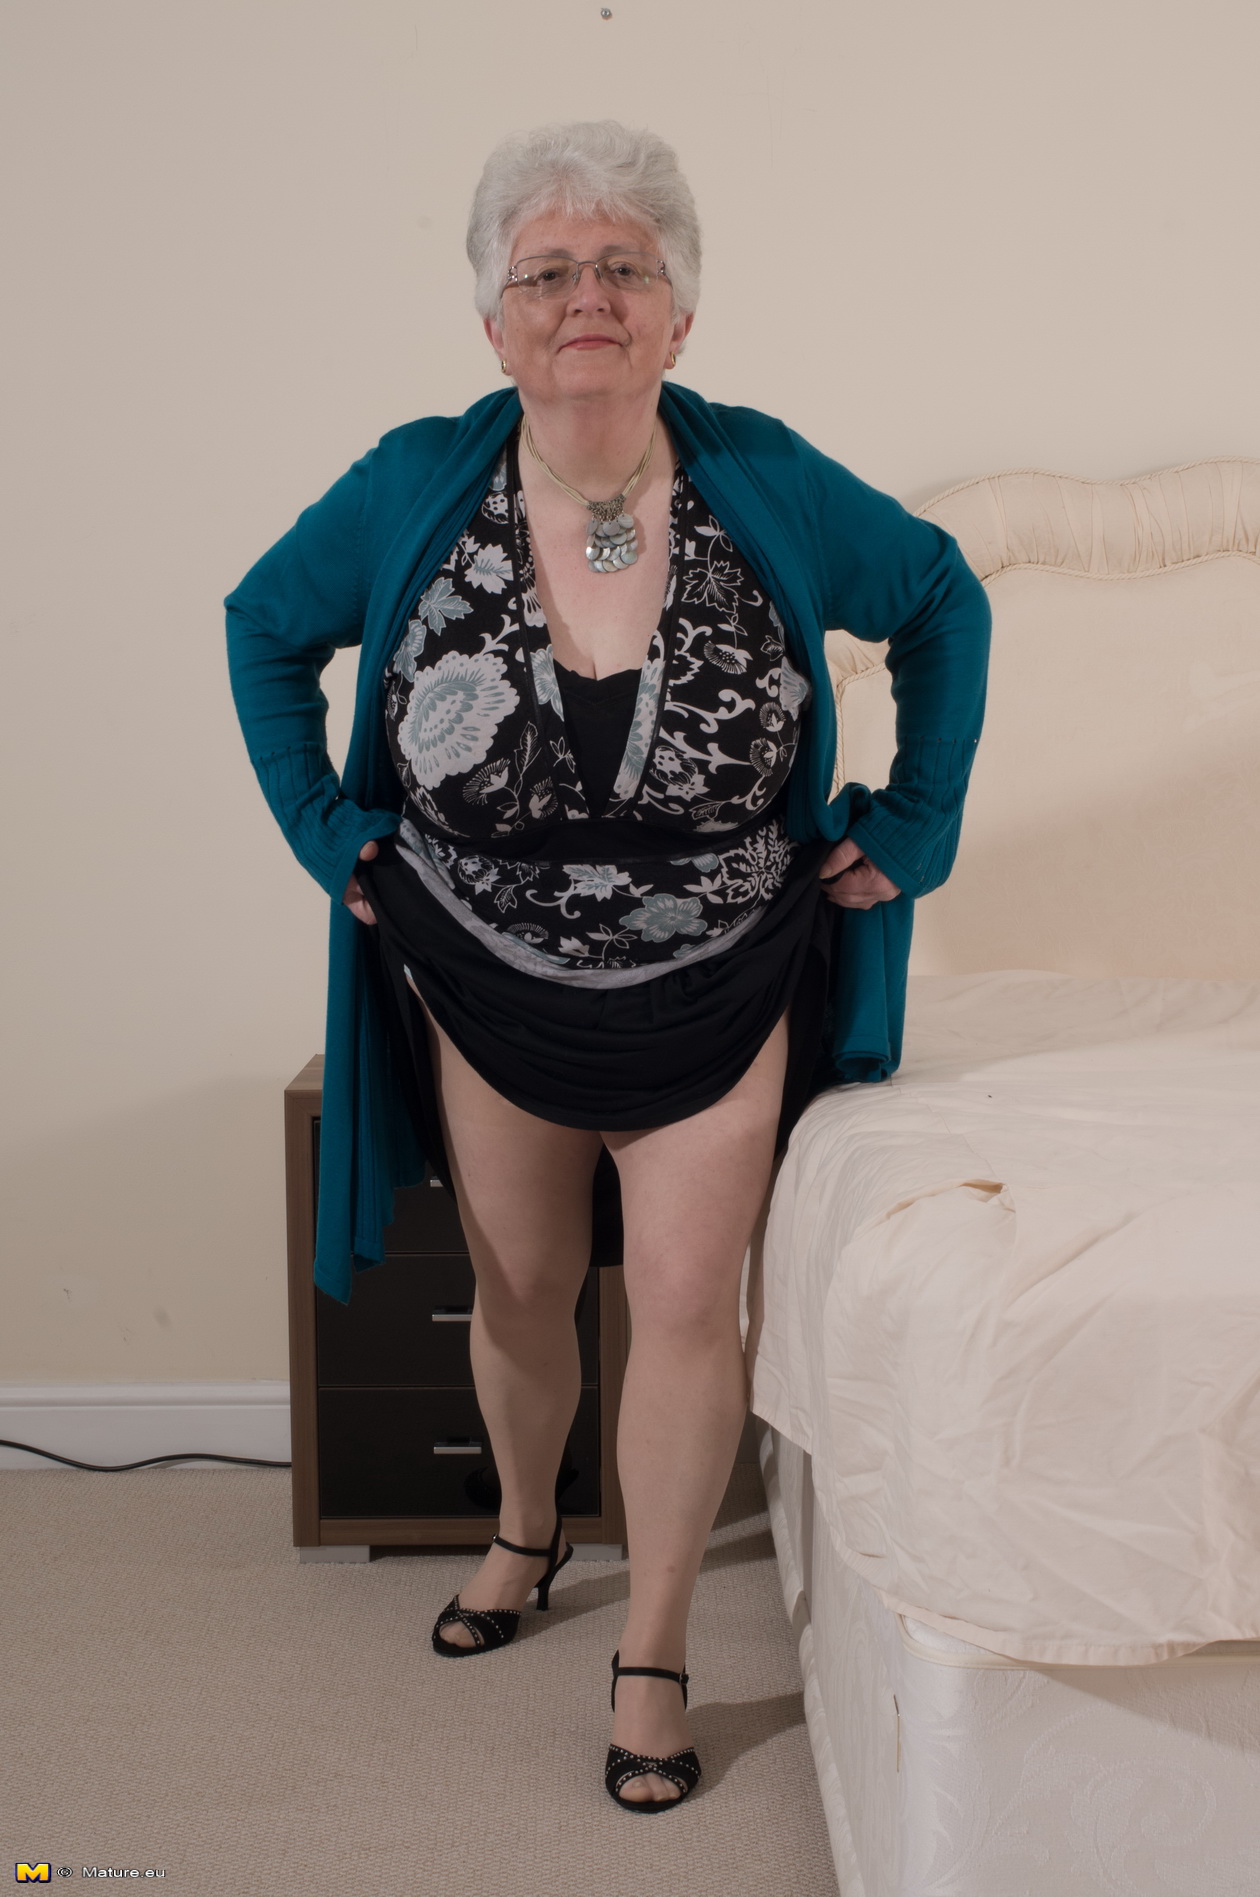 Naughty Big breasted British granny getting frisky image pic